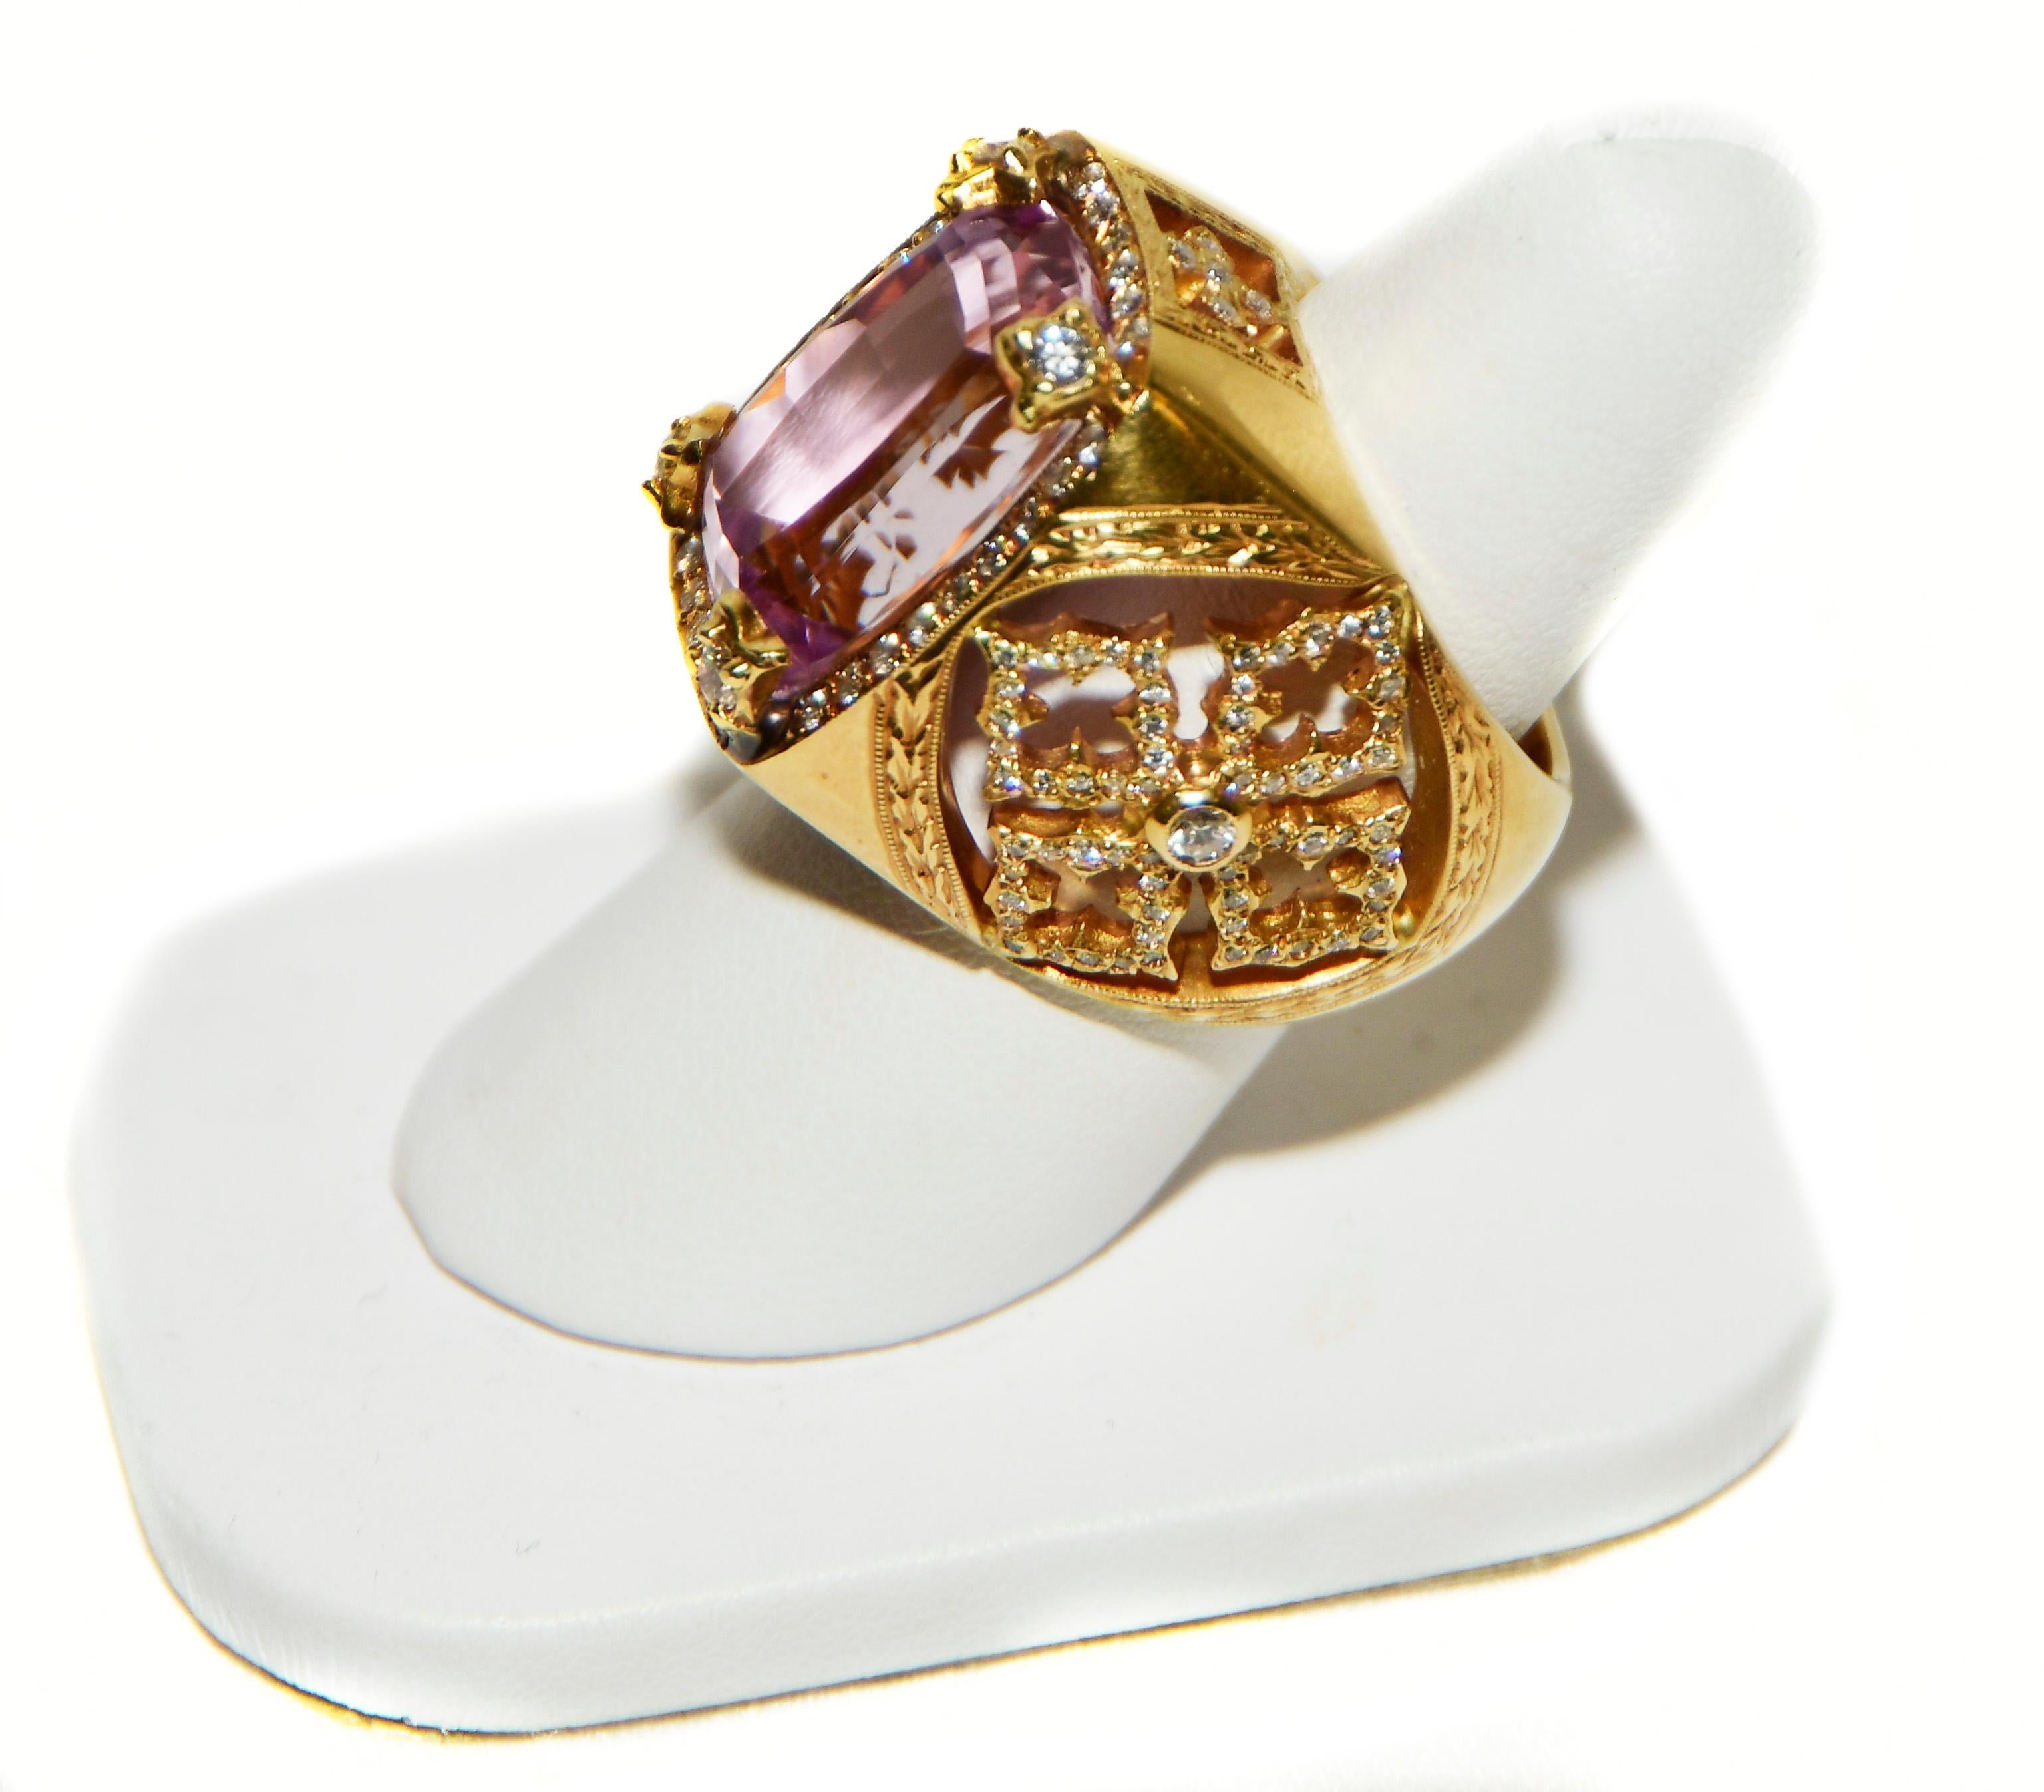 Loree Rodkin's specialty is fine statement jewelry!  Her Gothic Collection replicates architectural designs from ancient times. This example of her art is extraordinary!  Meticulously crafted in 18 karat yellow gold, this ring is definitely bold and